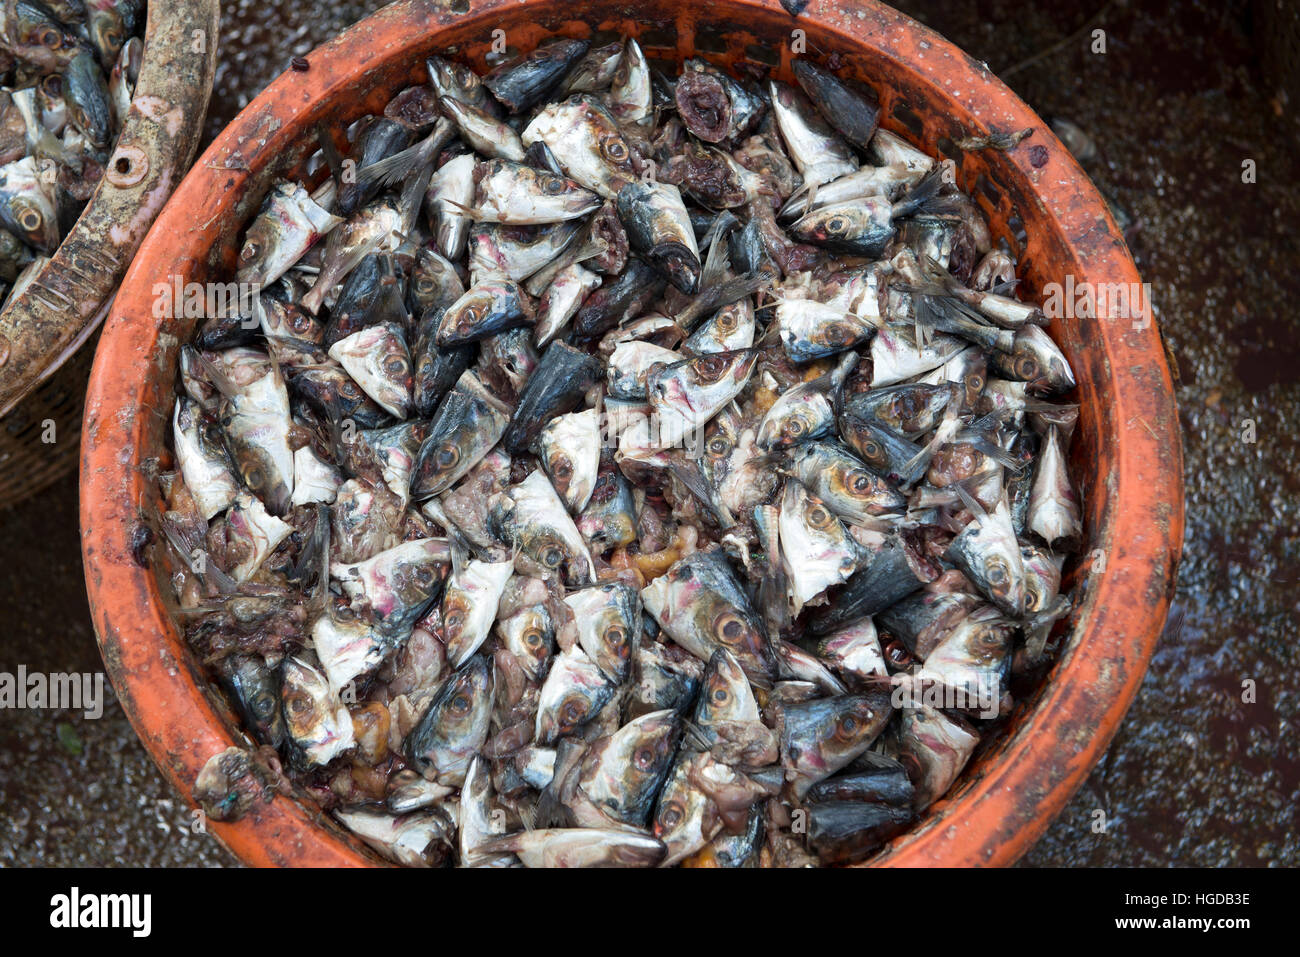 Thailand, Songkhla, Koh Yo, Waste of fishes to make flours intended for the animal feed Stock Photo